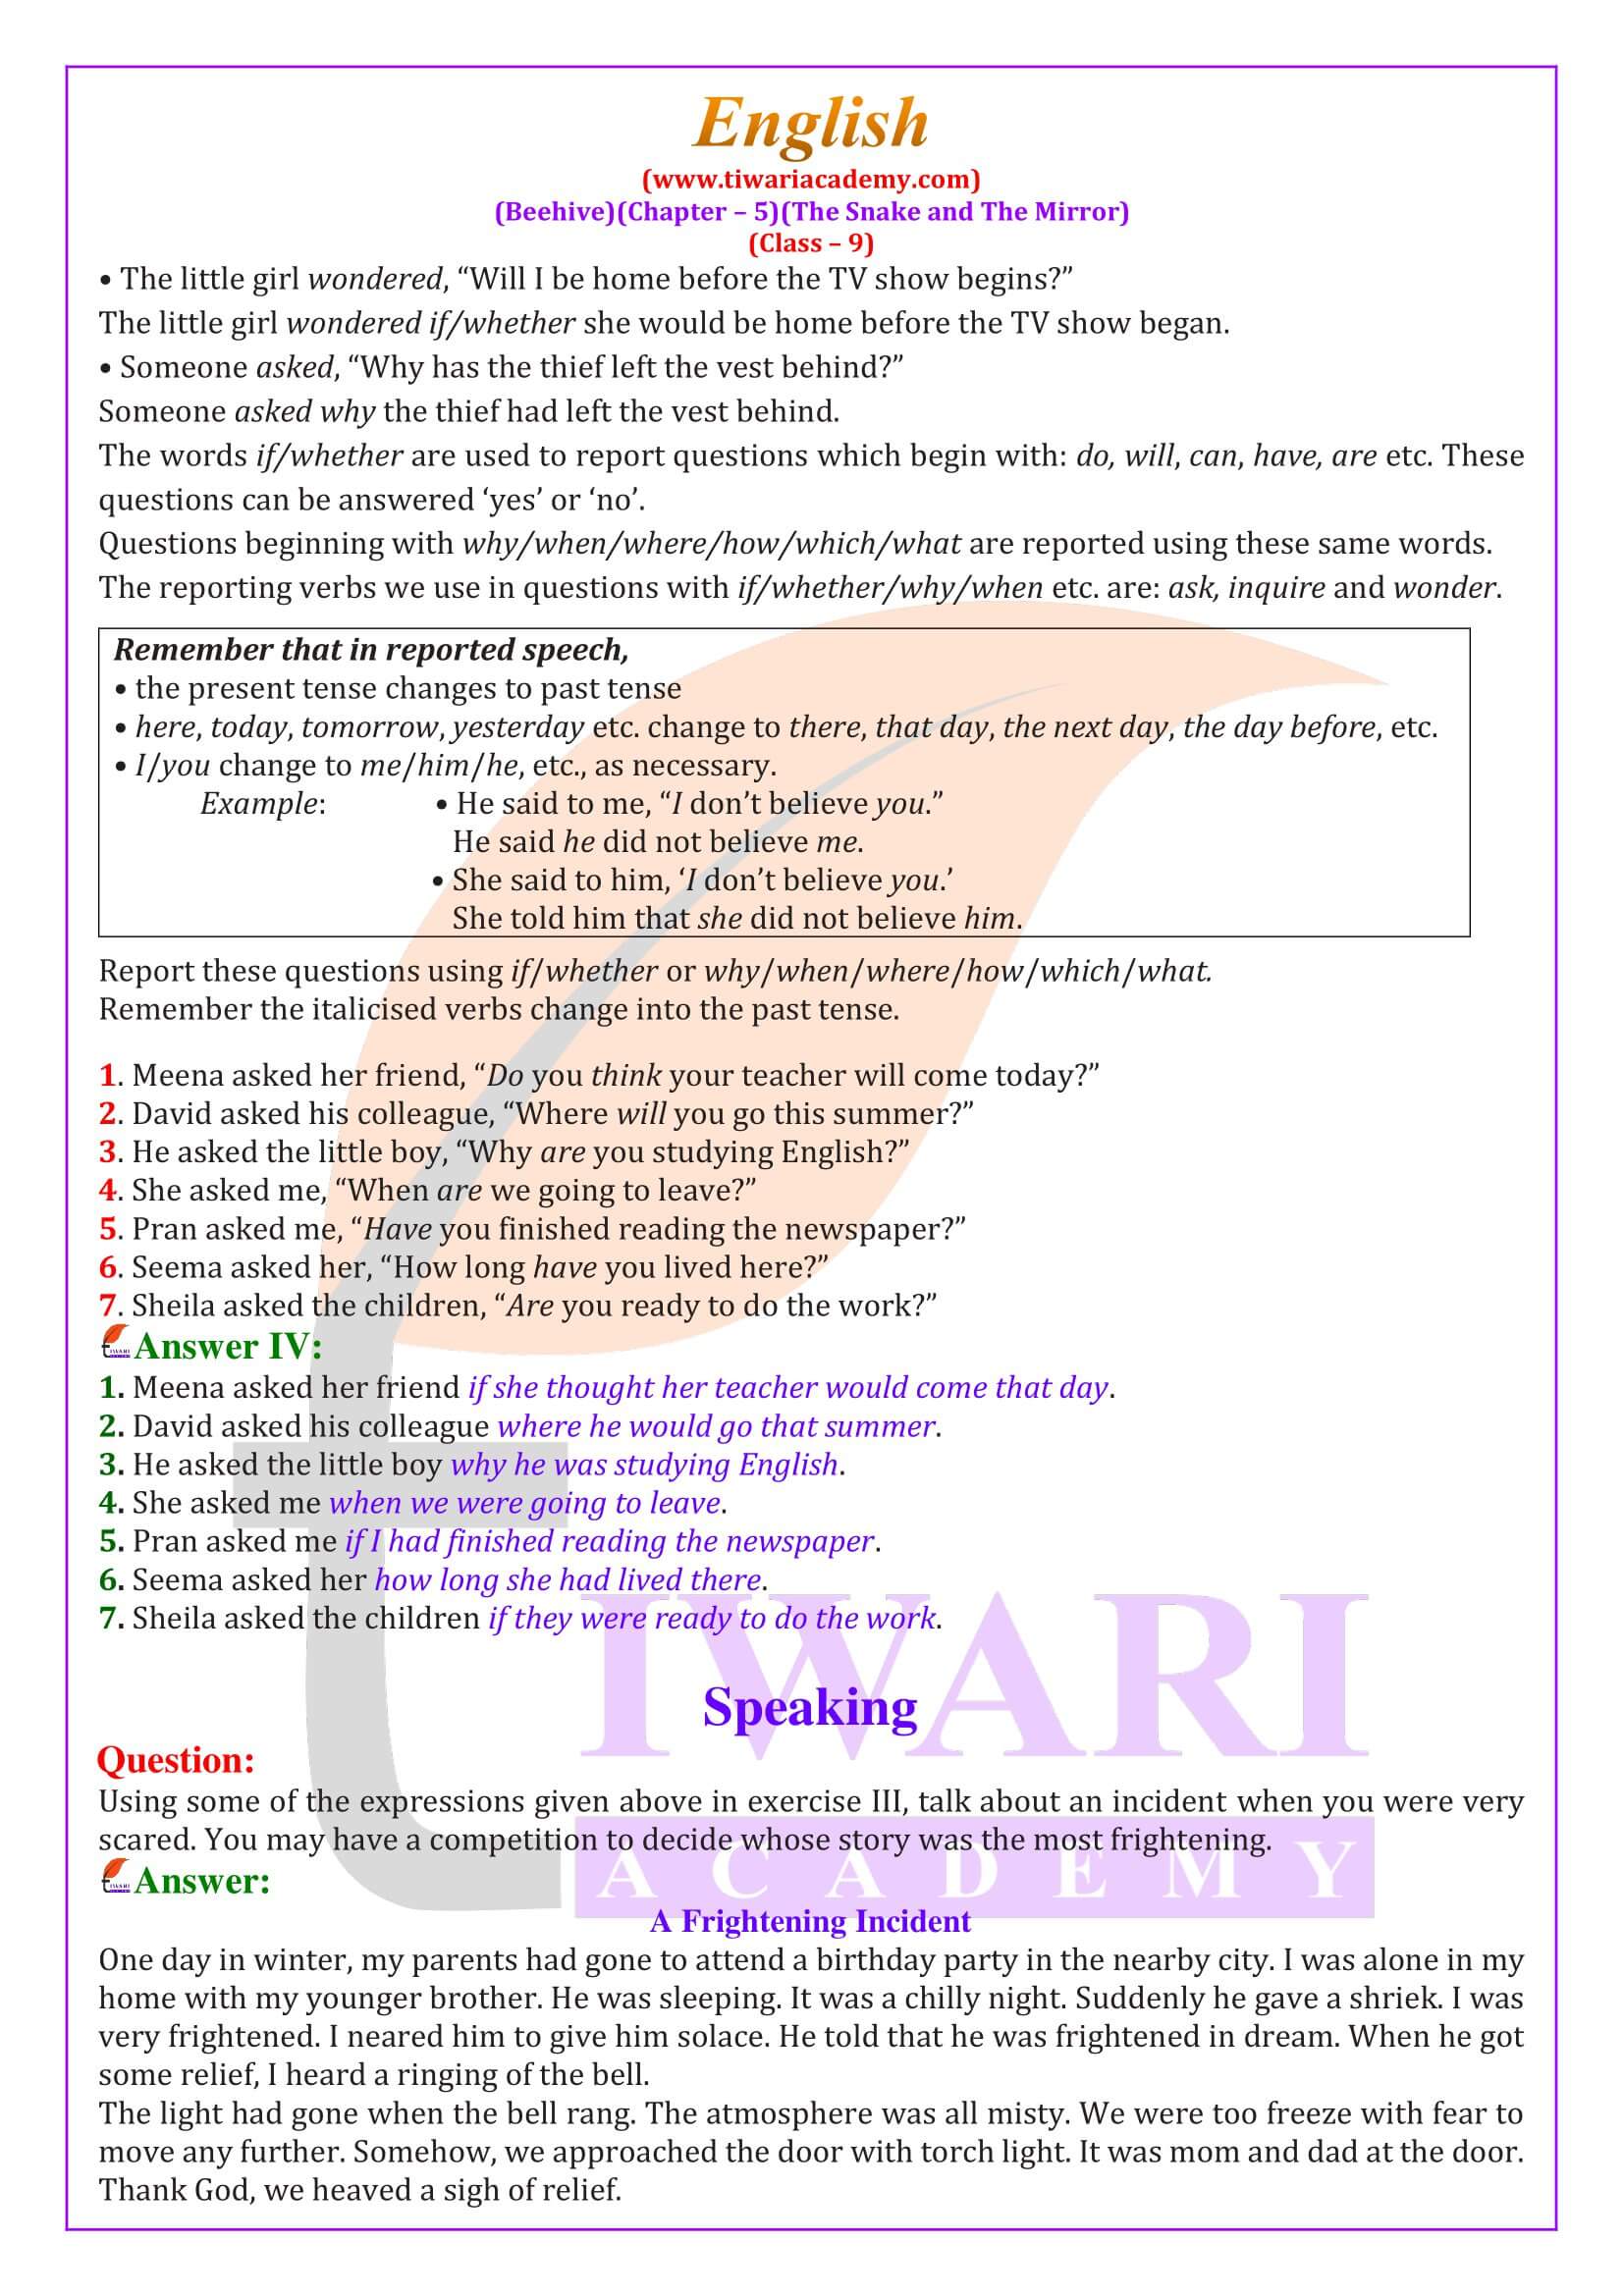 NCERT Solutions for Class 9 English Beehive Chapter 5